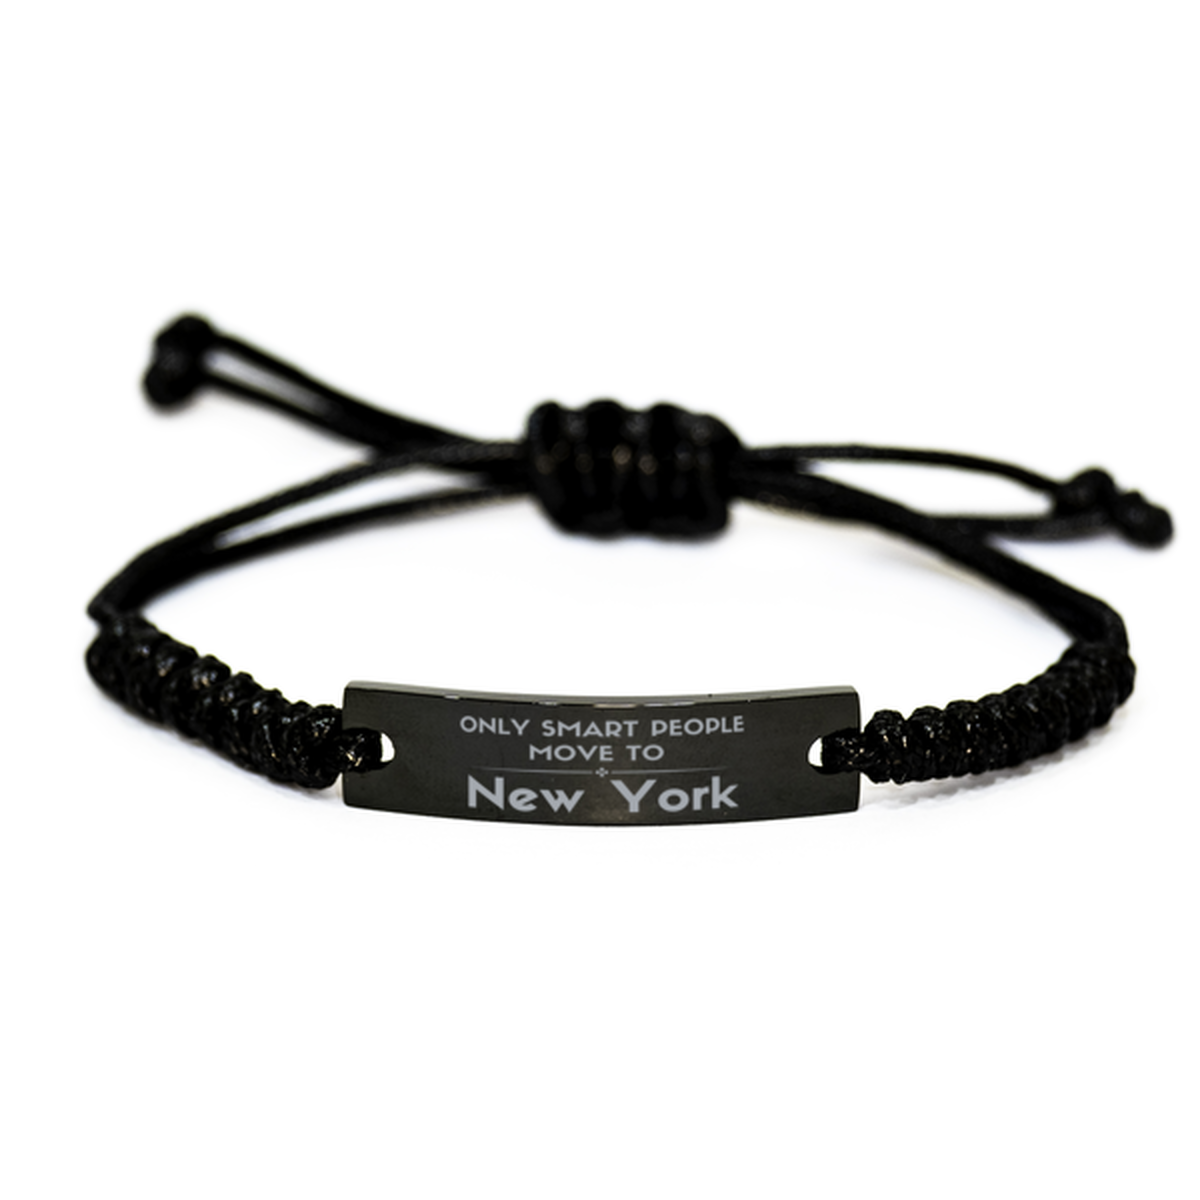 Only smart people move to New York Black Rope Bracelet, Gag Gifts For New York, Move to New York Gifts for Friends Coworker Funny Saying Quote